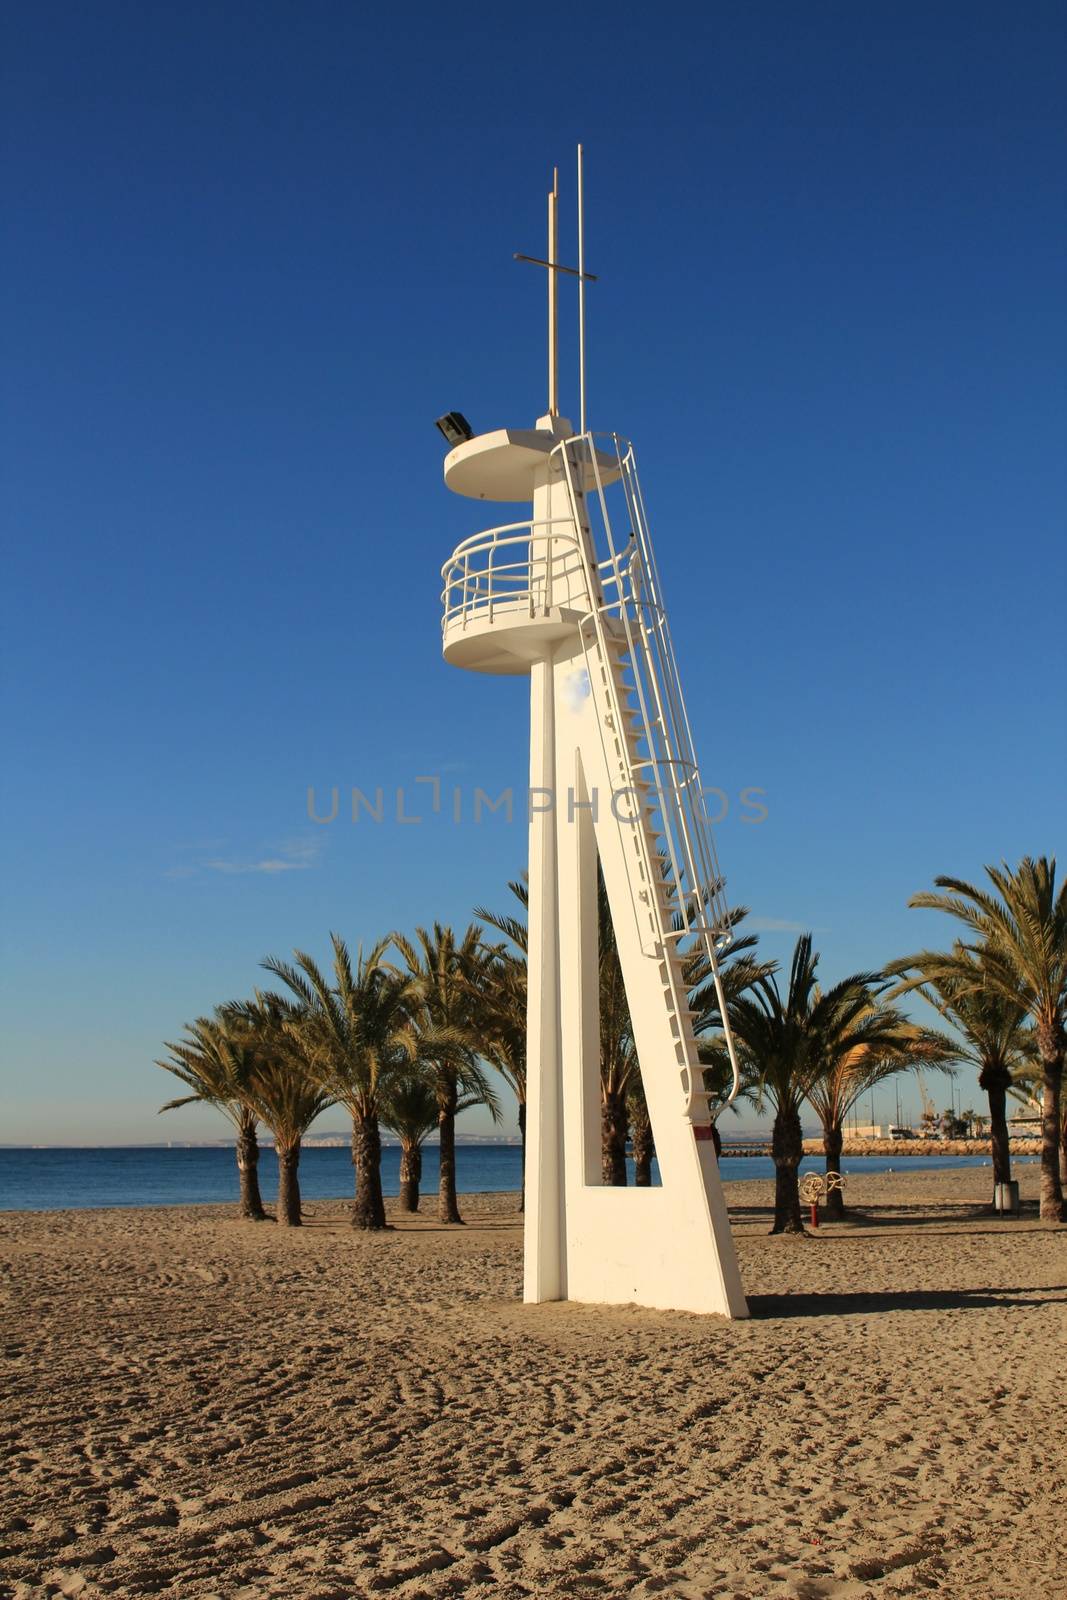 Lifeguard tower on the beach by soniabonet